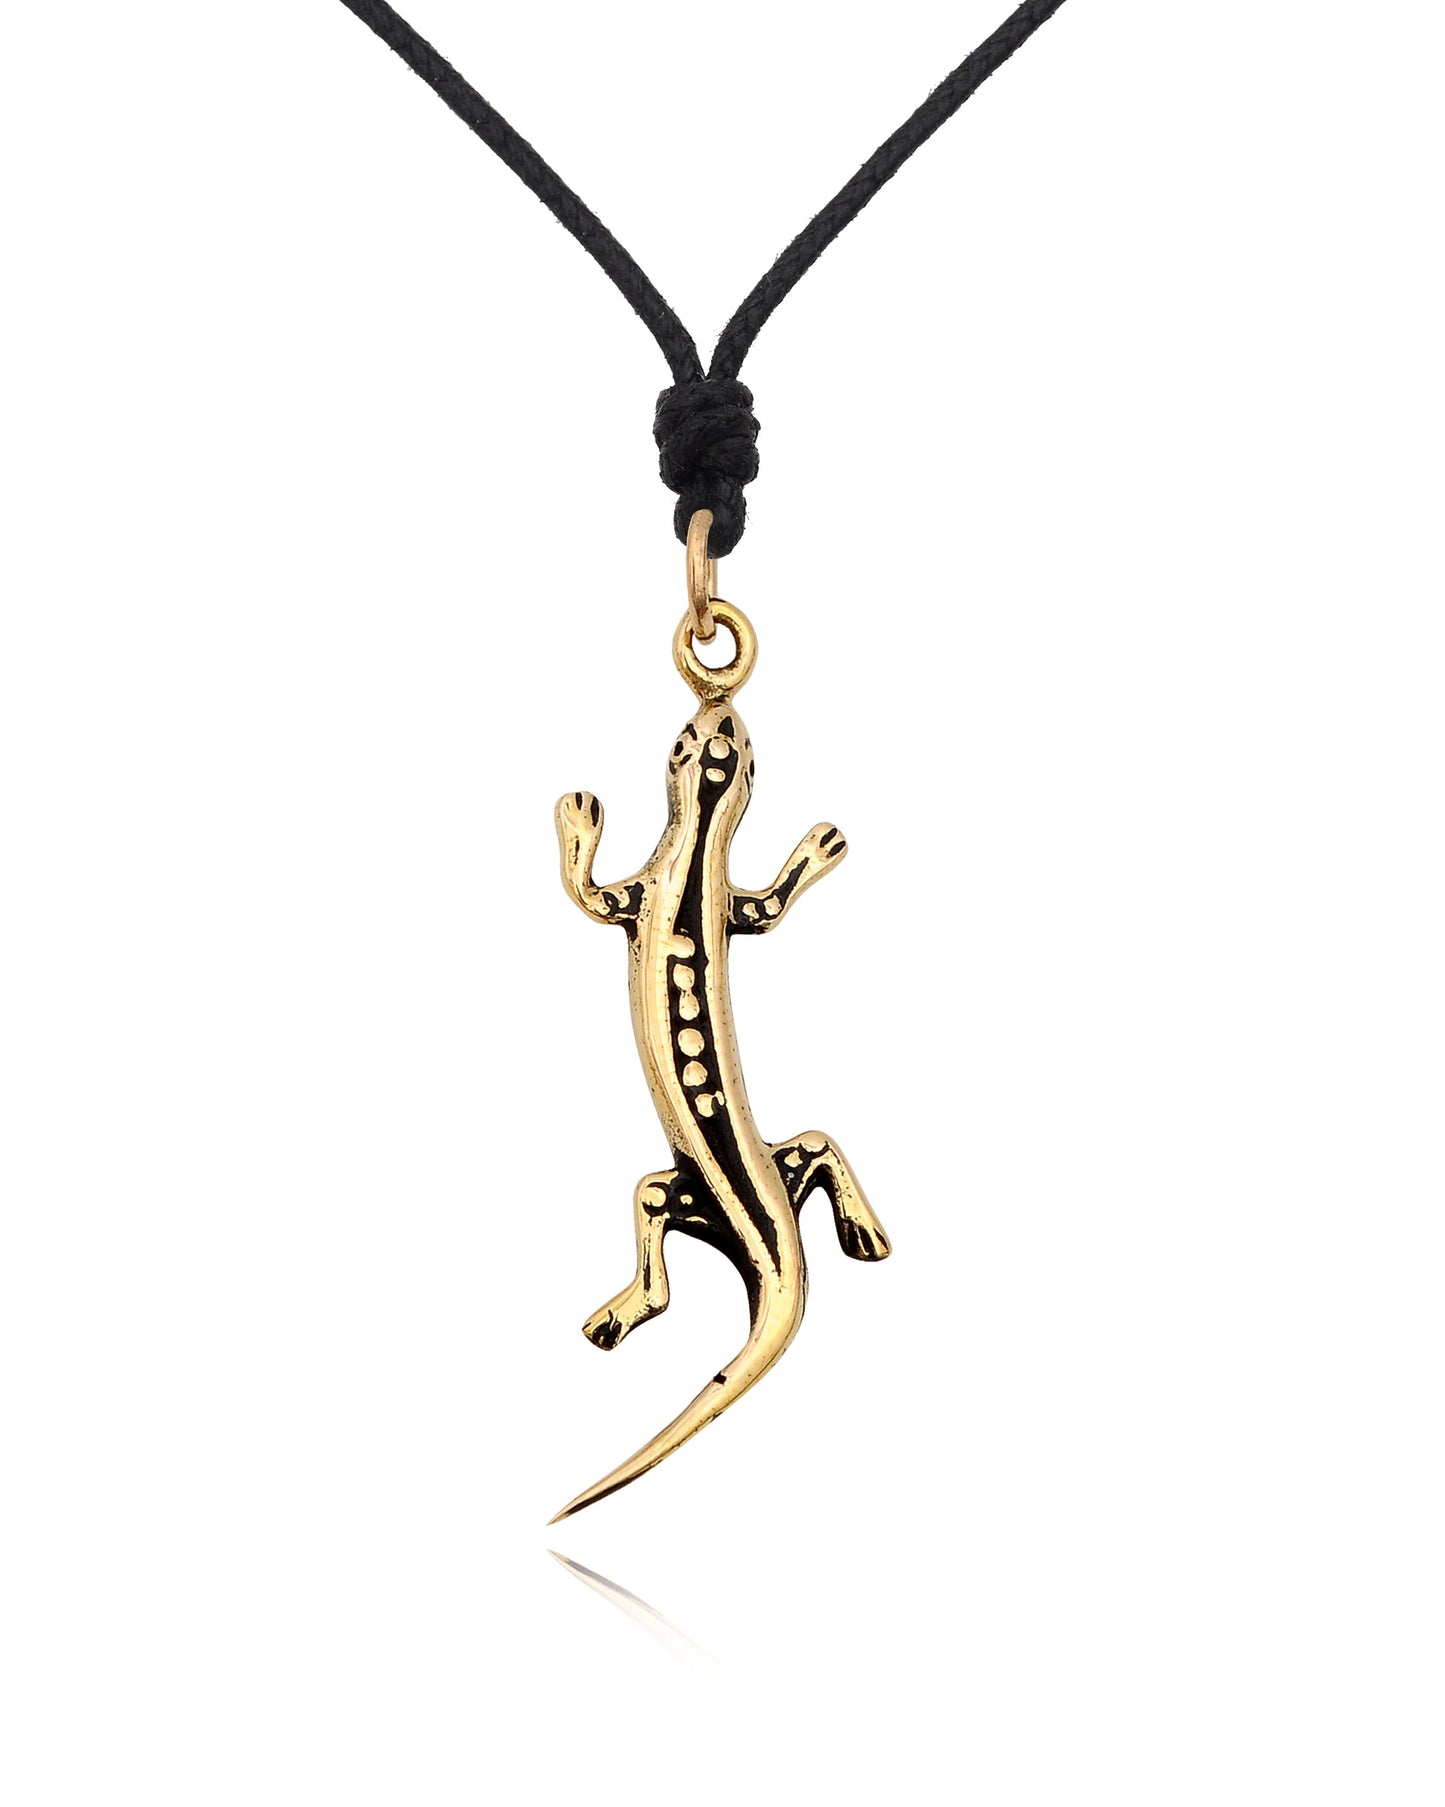 New Lizard 92.5 Sterling Silver Gold Brass Charm Necklace Pendant Jewelry